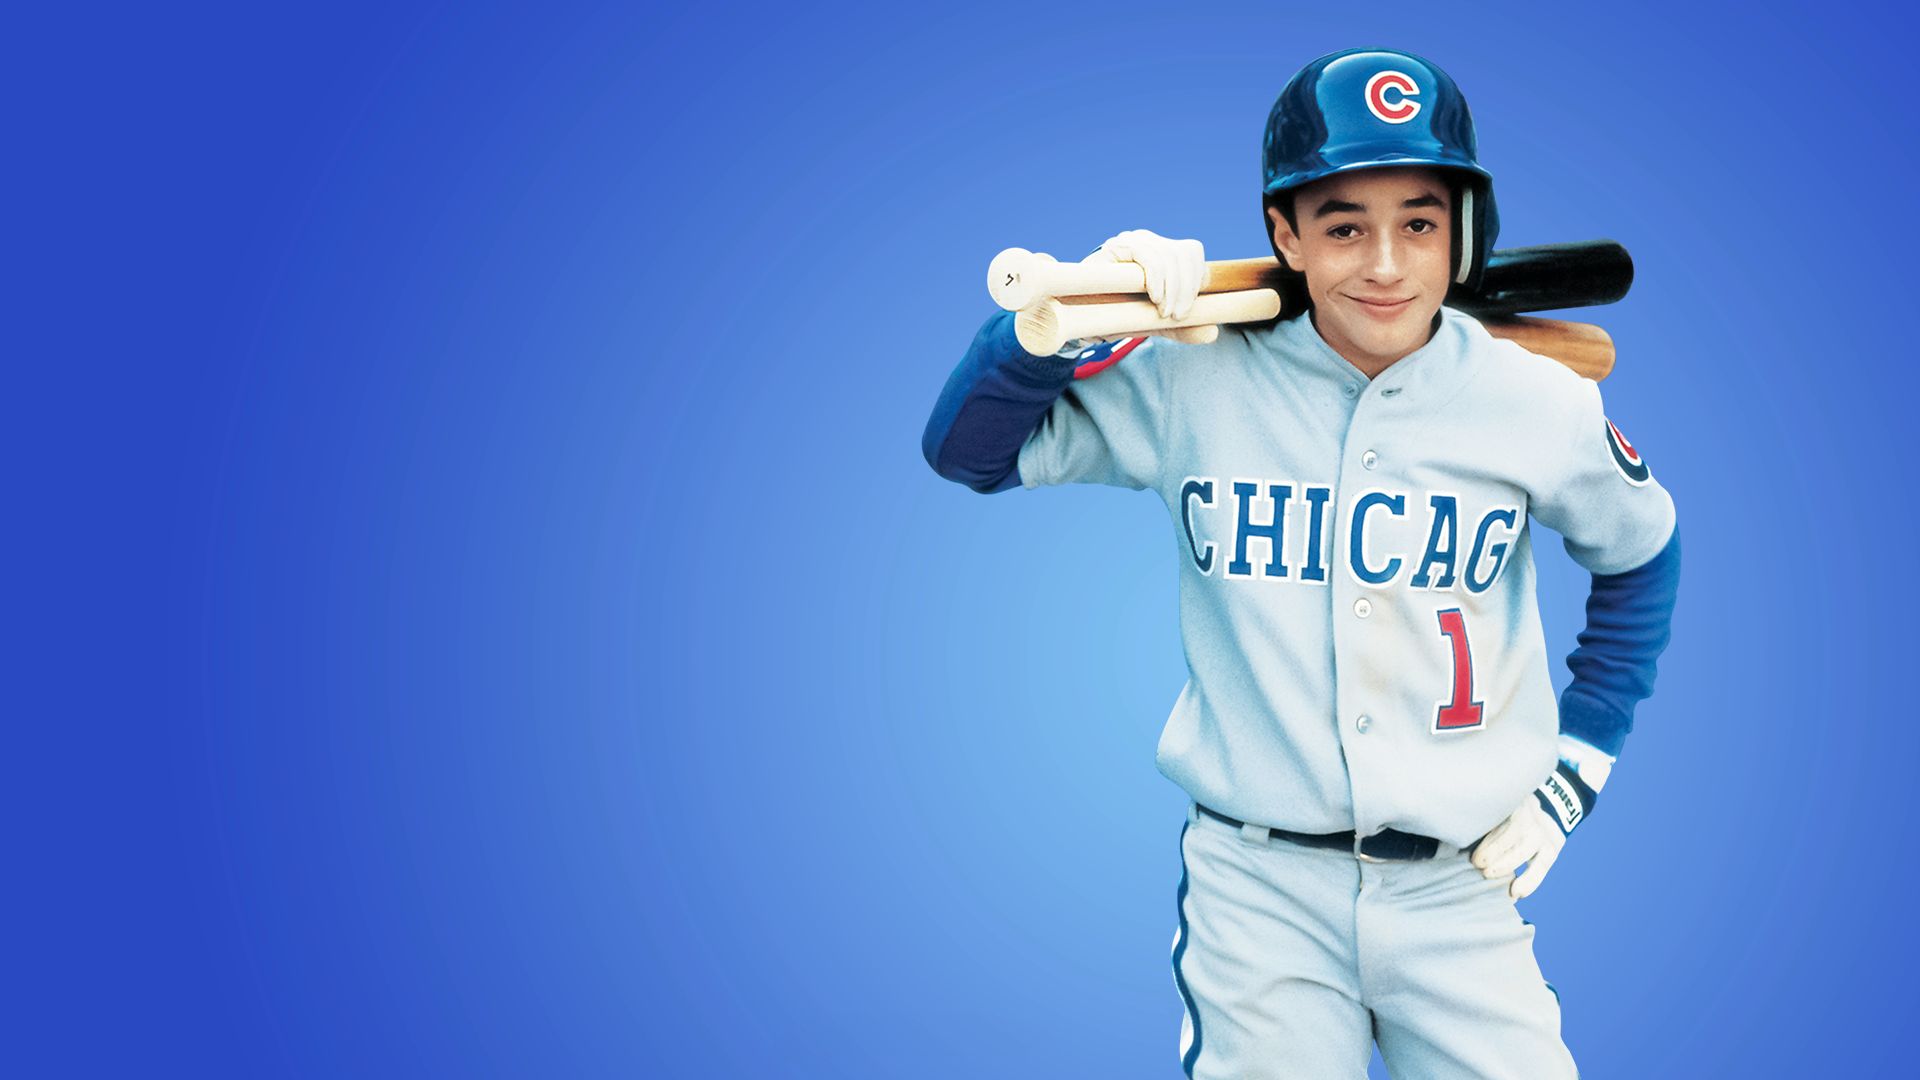 Rookie of the Year Henry Rowengartner Chicago 1 Baseball Jersey